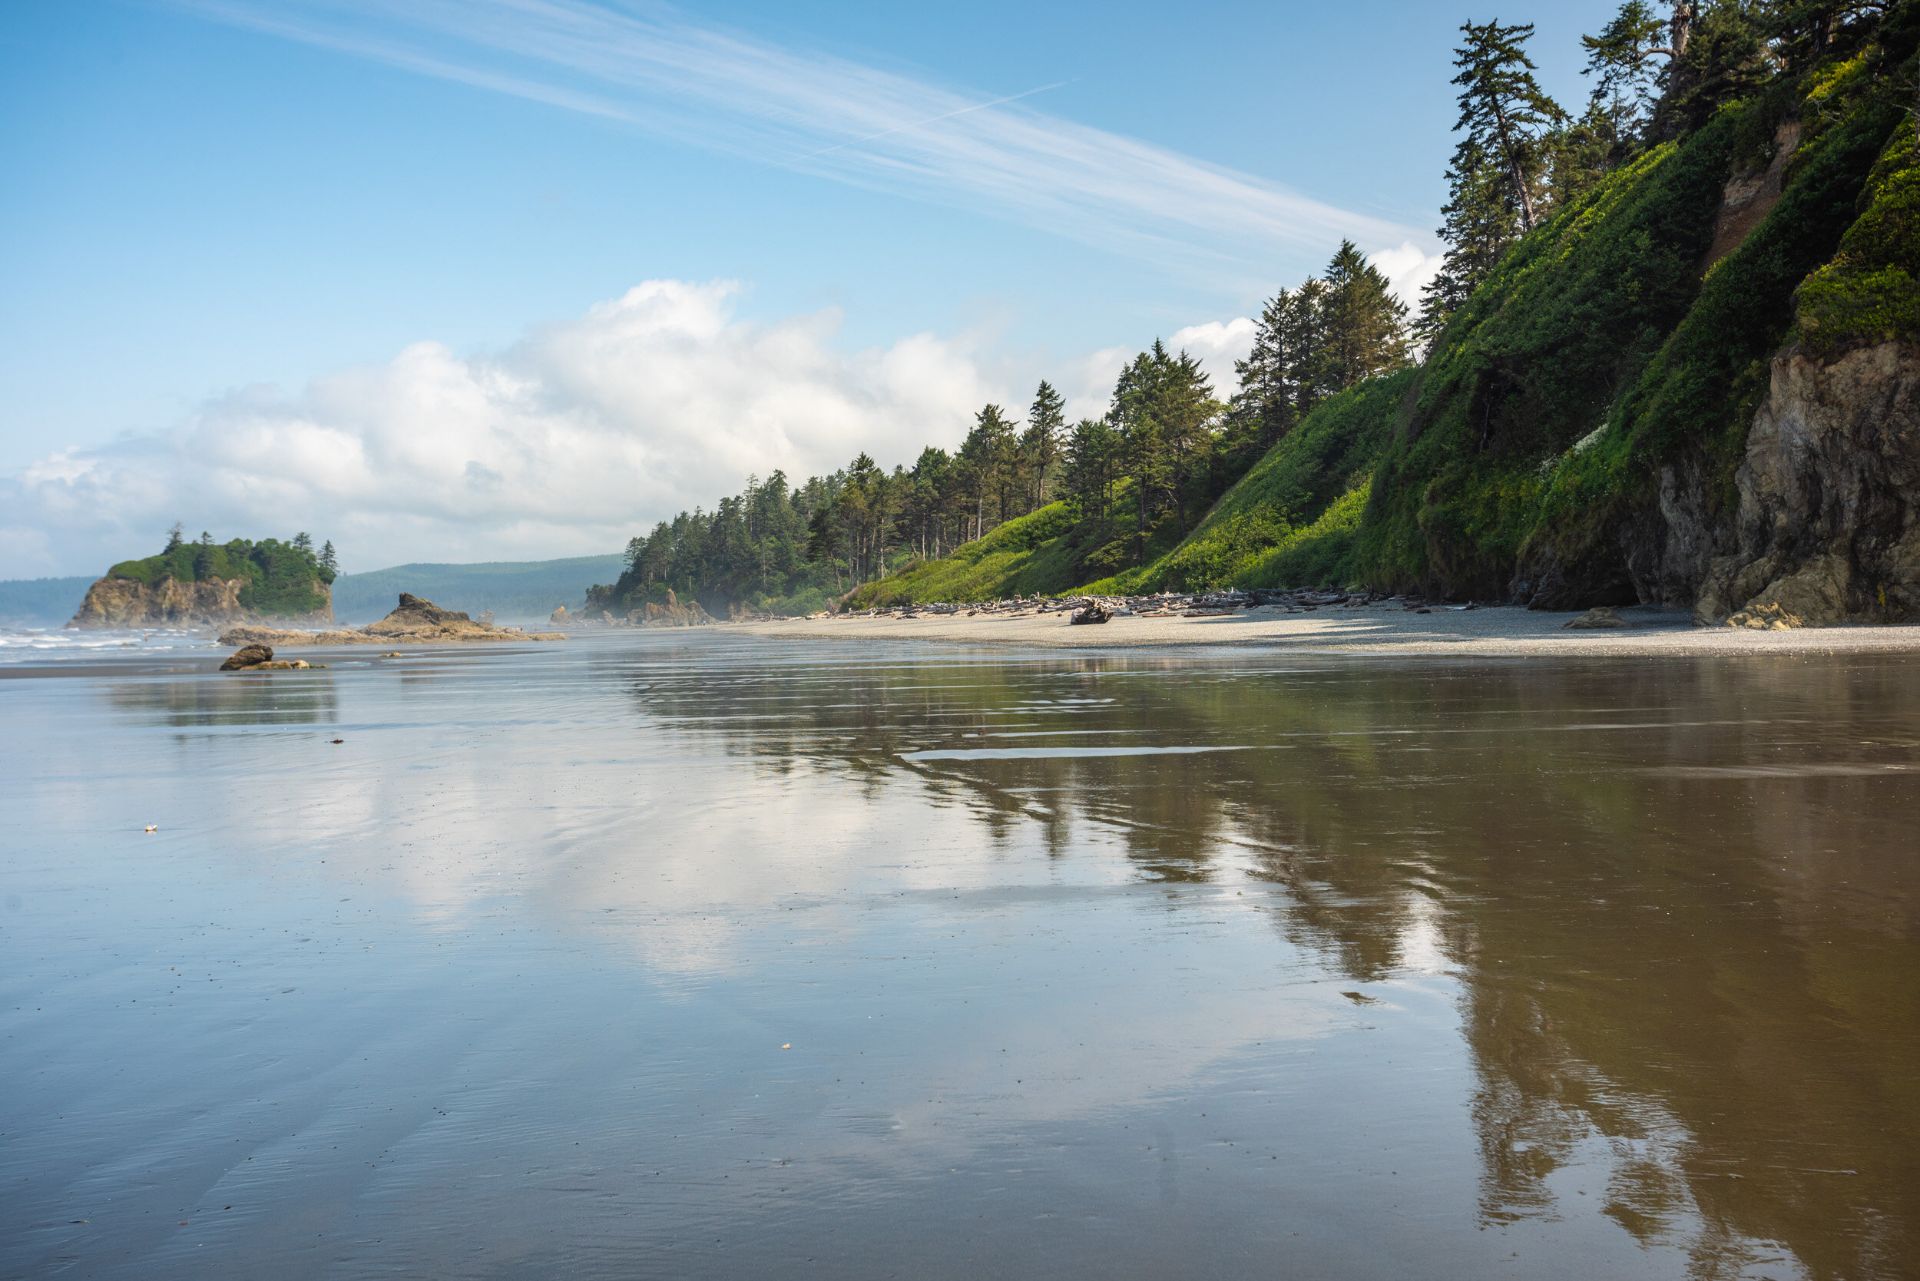 A Few Minutes Stroll to a Pacific Ocean Beach, in the Evergreen State!